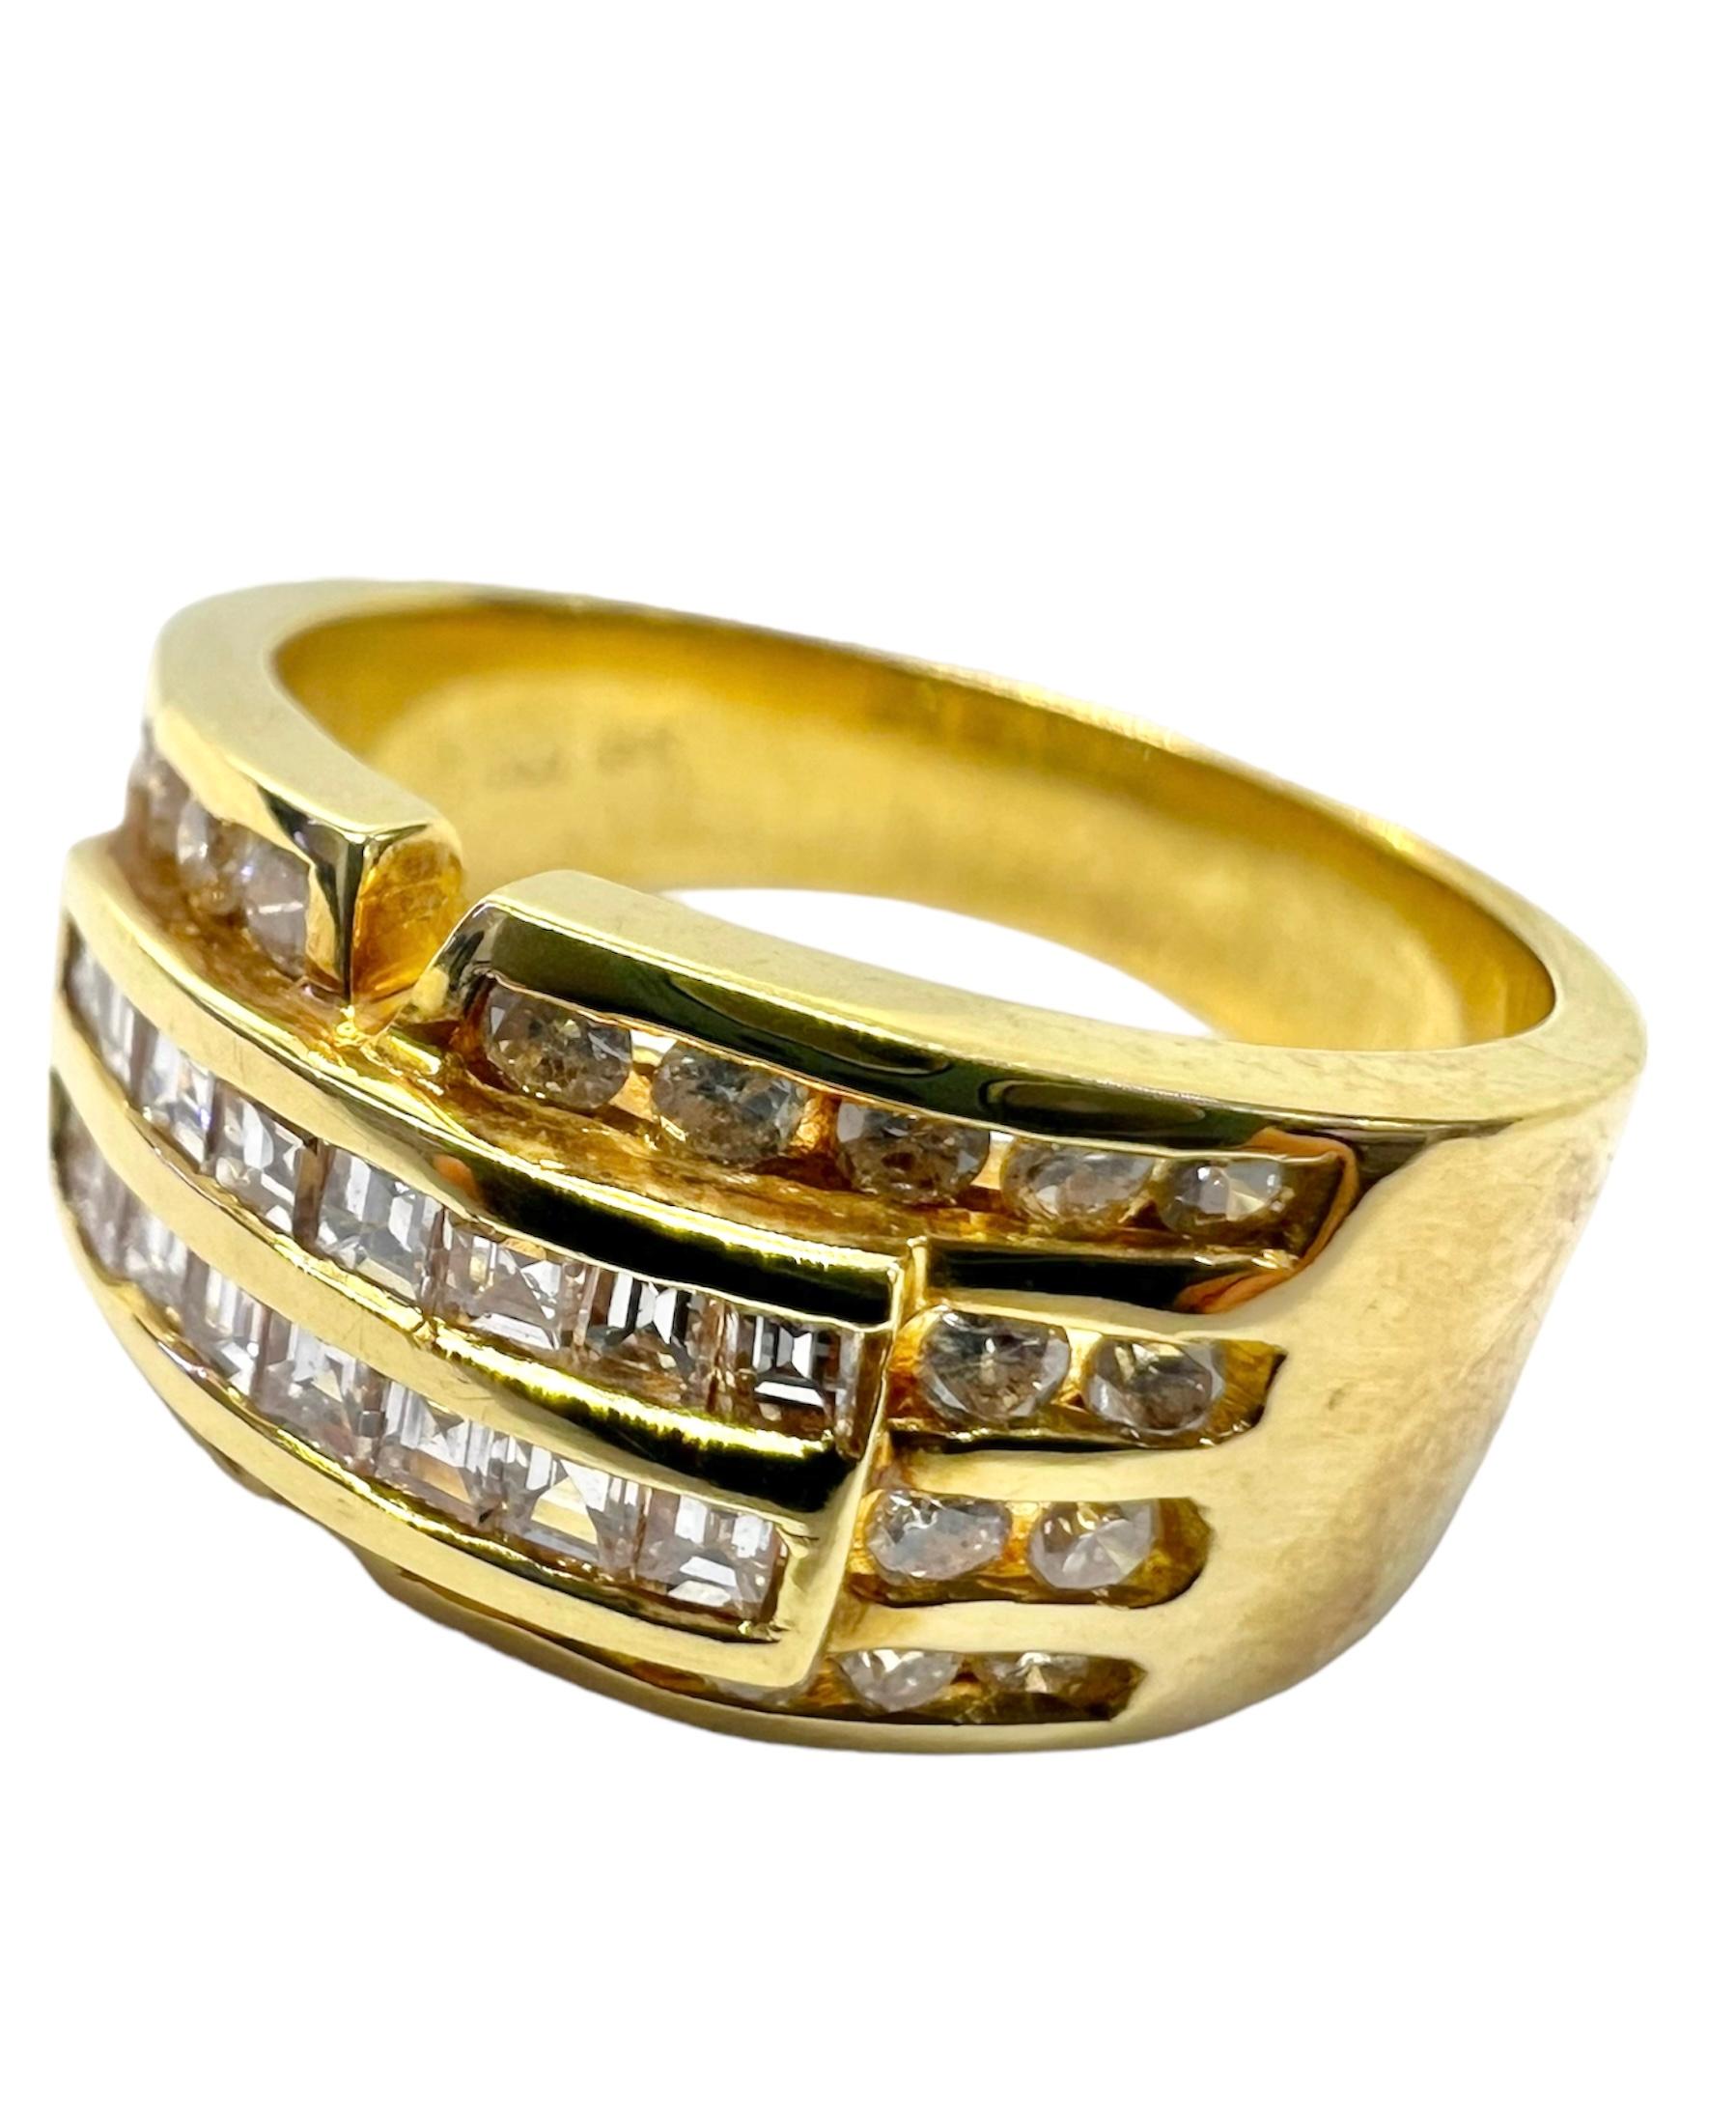 18K yellow gold ring with square cut diamonds and round diamonds.

Sophia D by Joseph Dardashti LTD has been known worldwide for 35 years and are inspired by classic Art Deco design that merges with modern manufacturing techniques.  